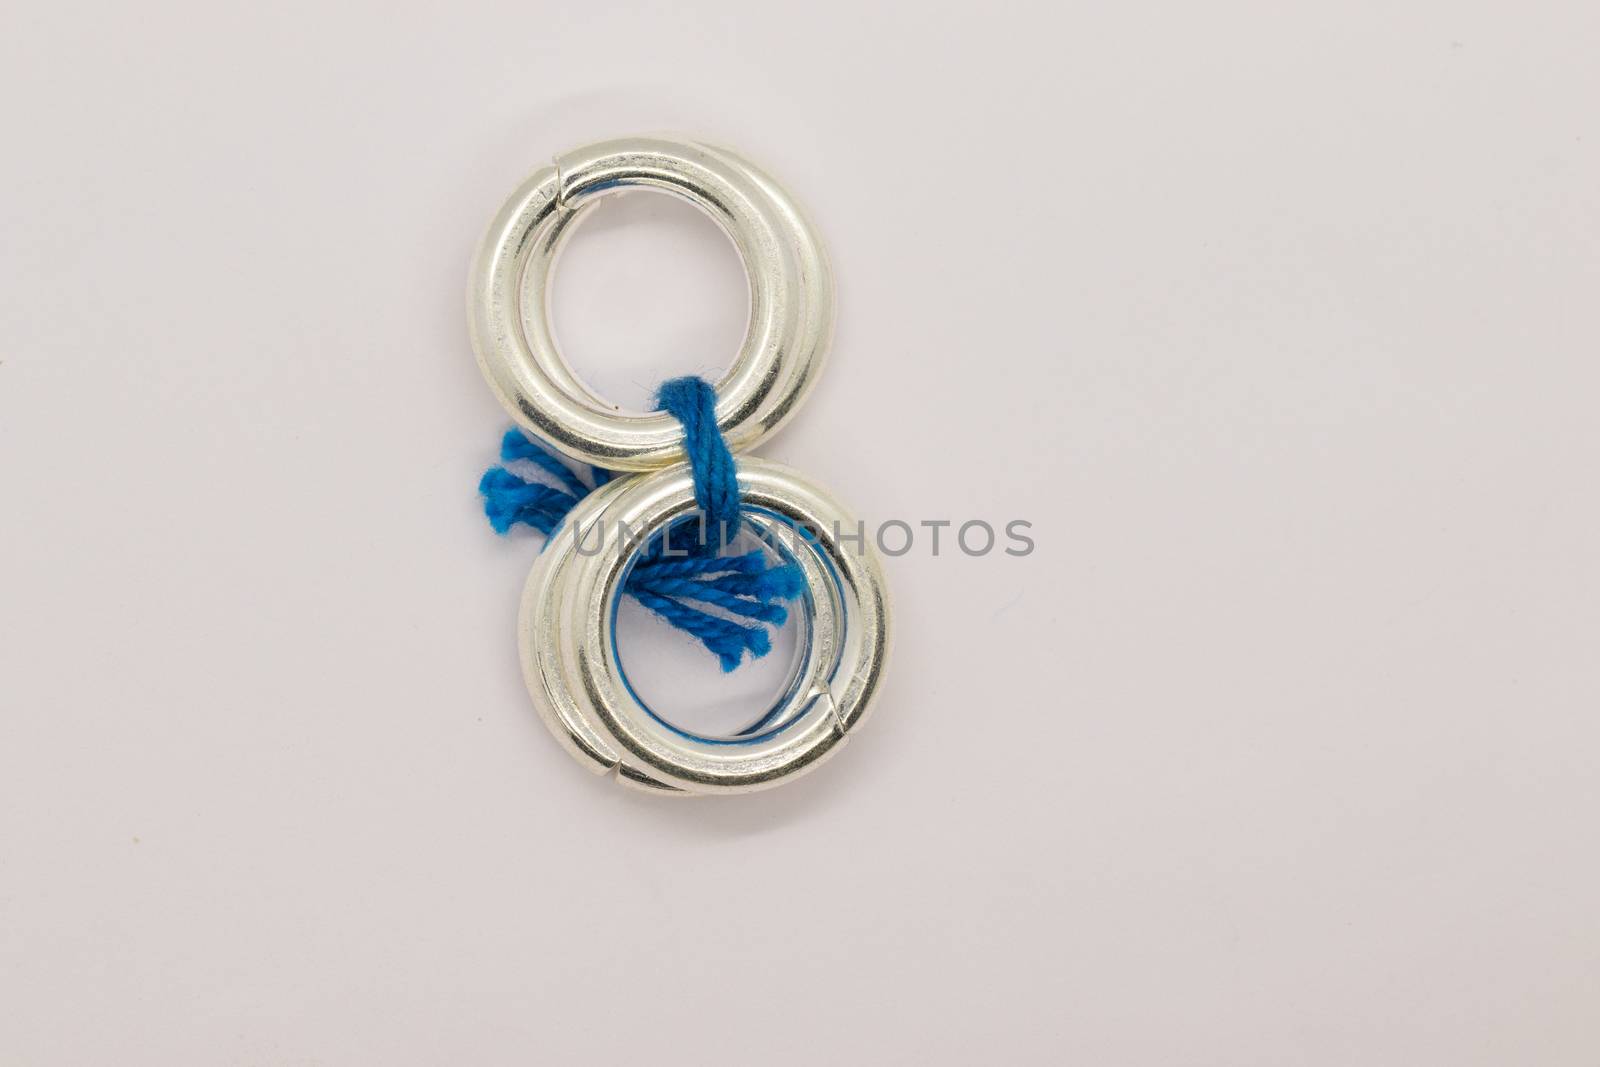 two pair leg silver rings with blue threats by 9500102400